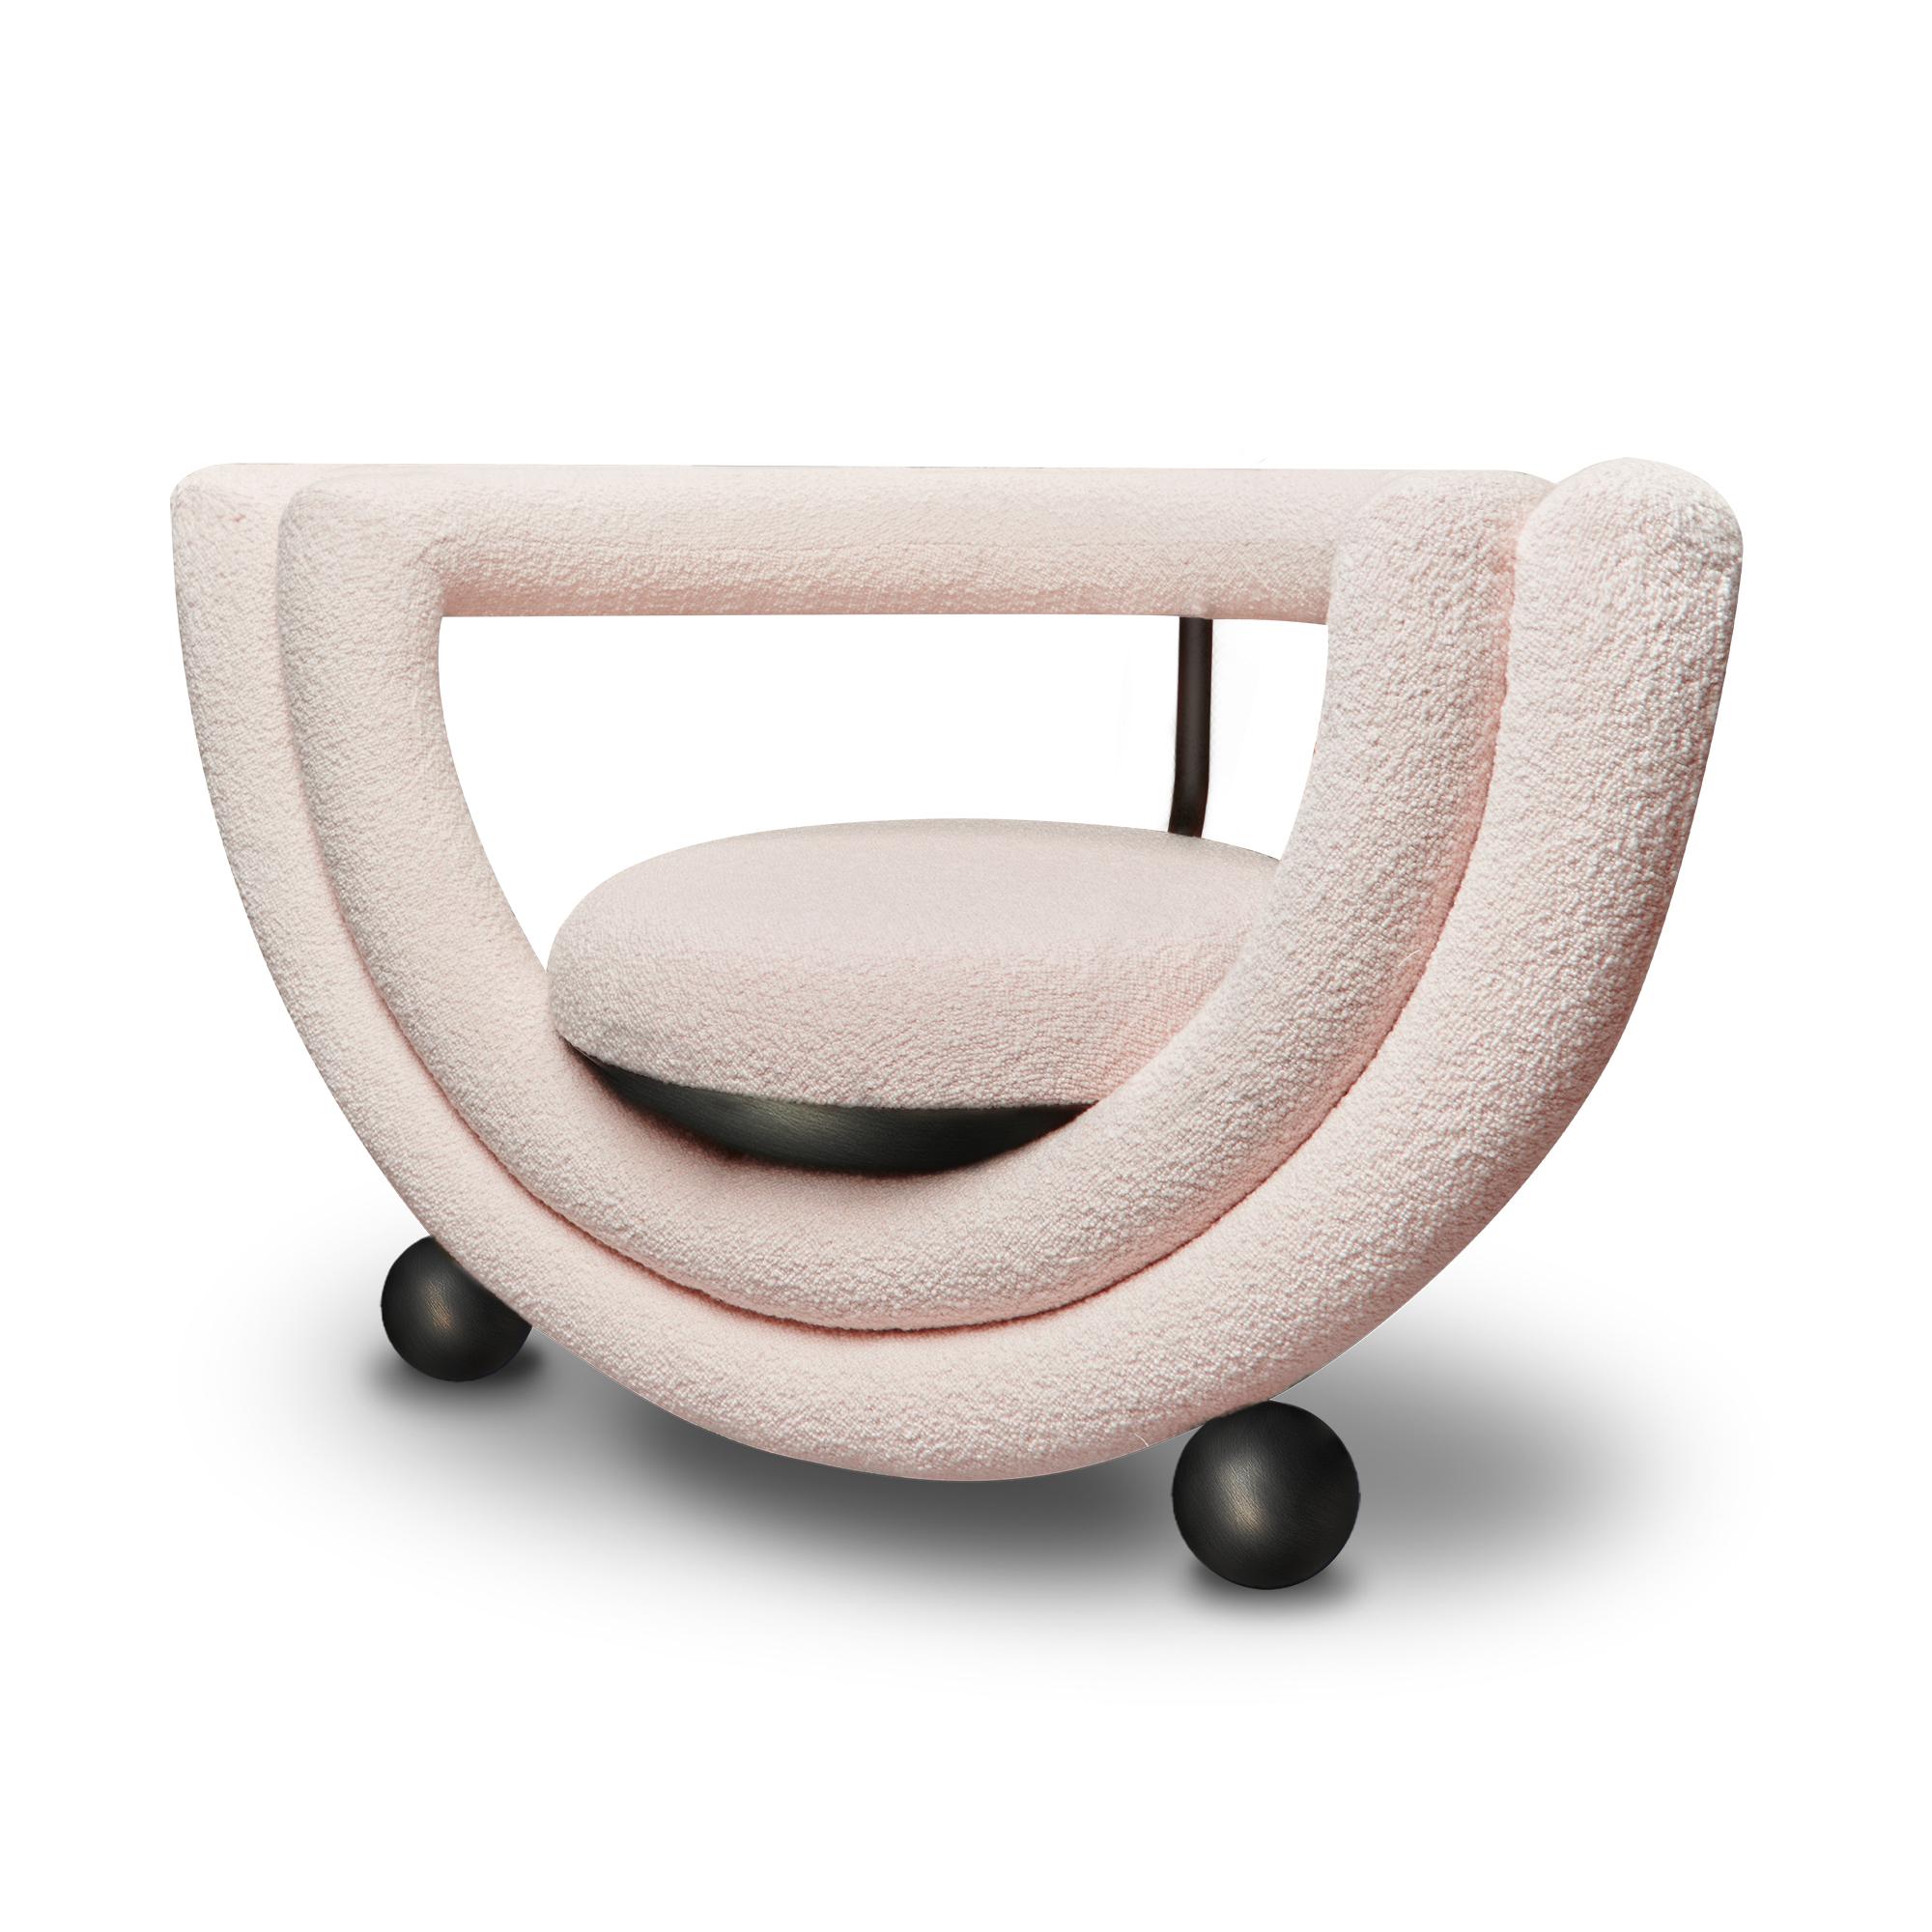 Kissing armchair features two semi-circle layers; one bearing the cupped seat and a second forming the back-rest. All the lines are covered with soft upholstery apart from the metal legs and metal cups, which hold the upholstered seat like an ice